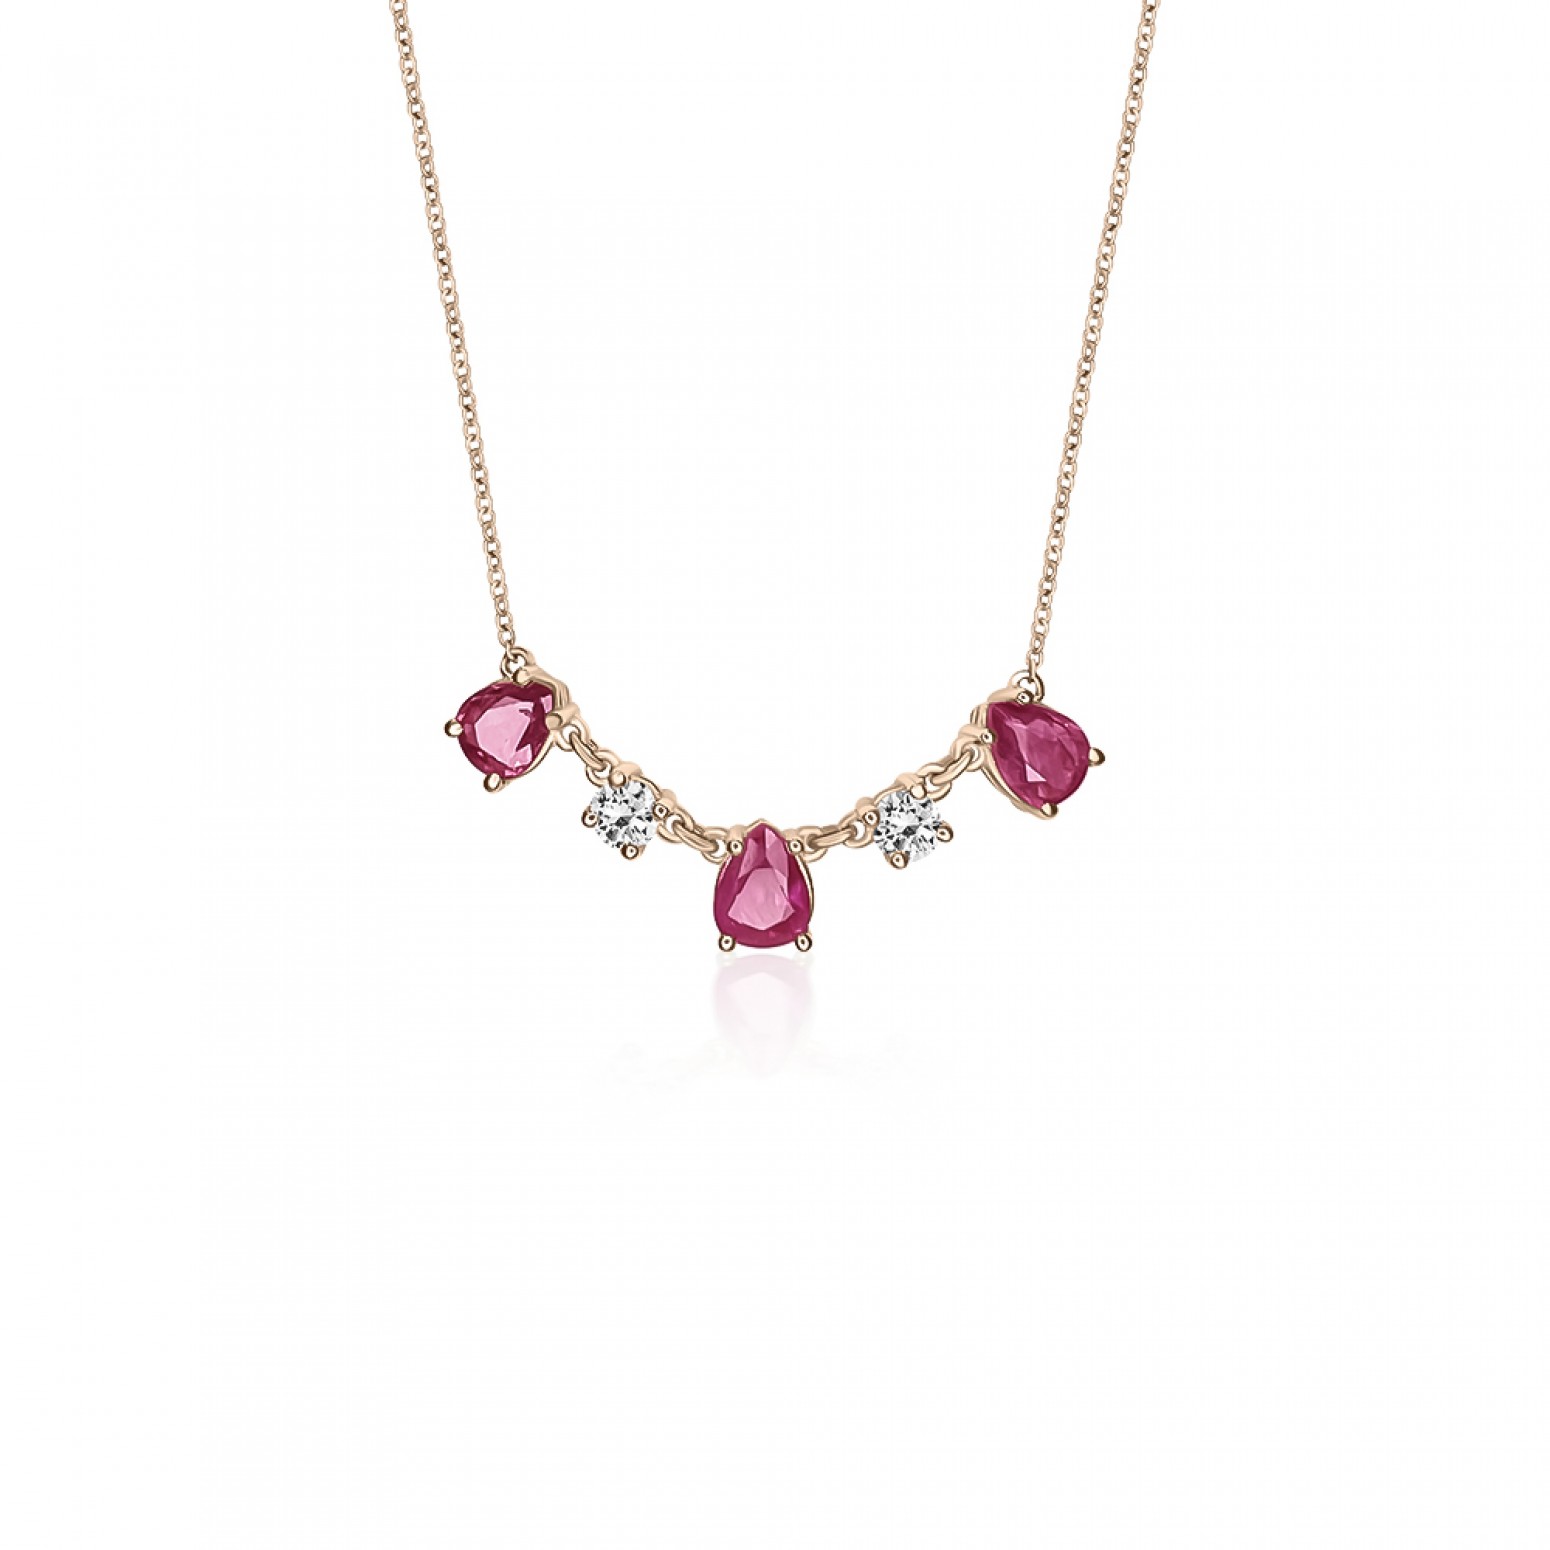 Necklace, Κ18 pink gold with rubies 1.16cts and diamonds 0.18ct, VS1, G, ko5758 NECKLACES Κοσμηματα - chrilia.gr